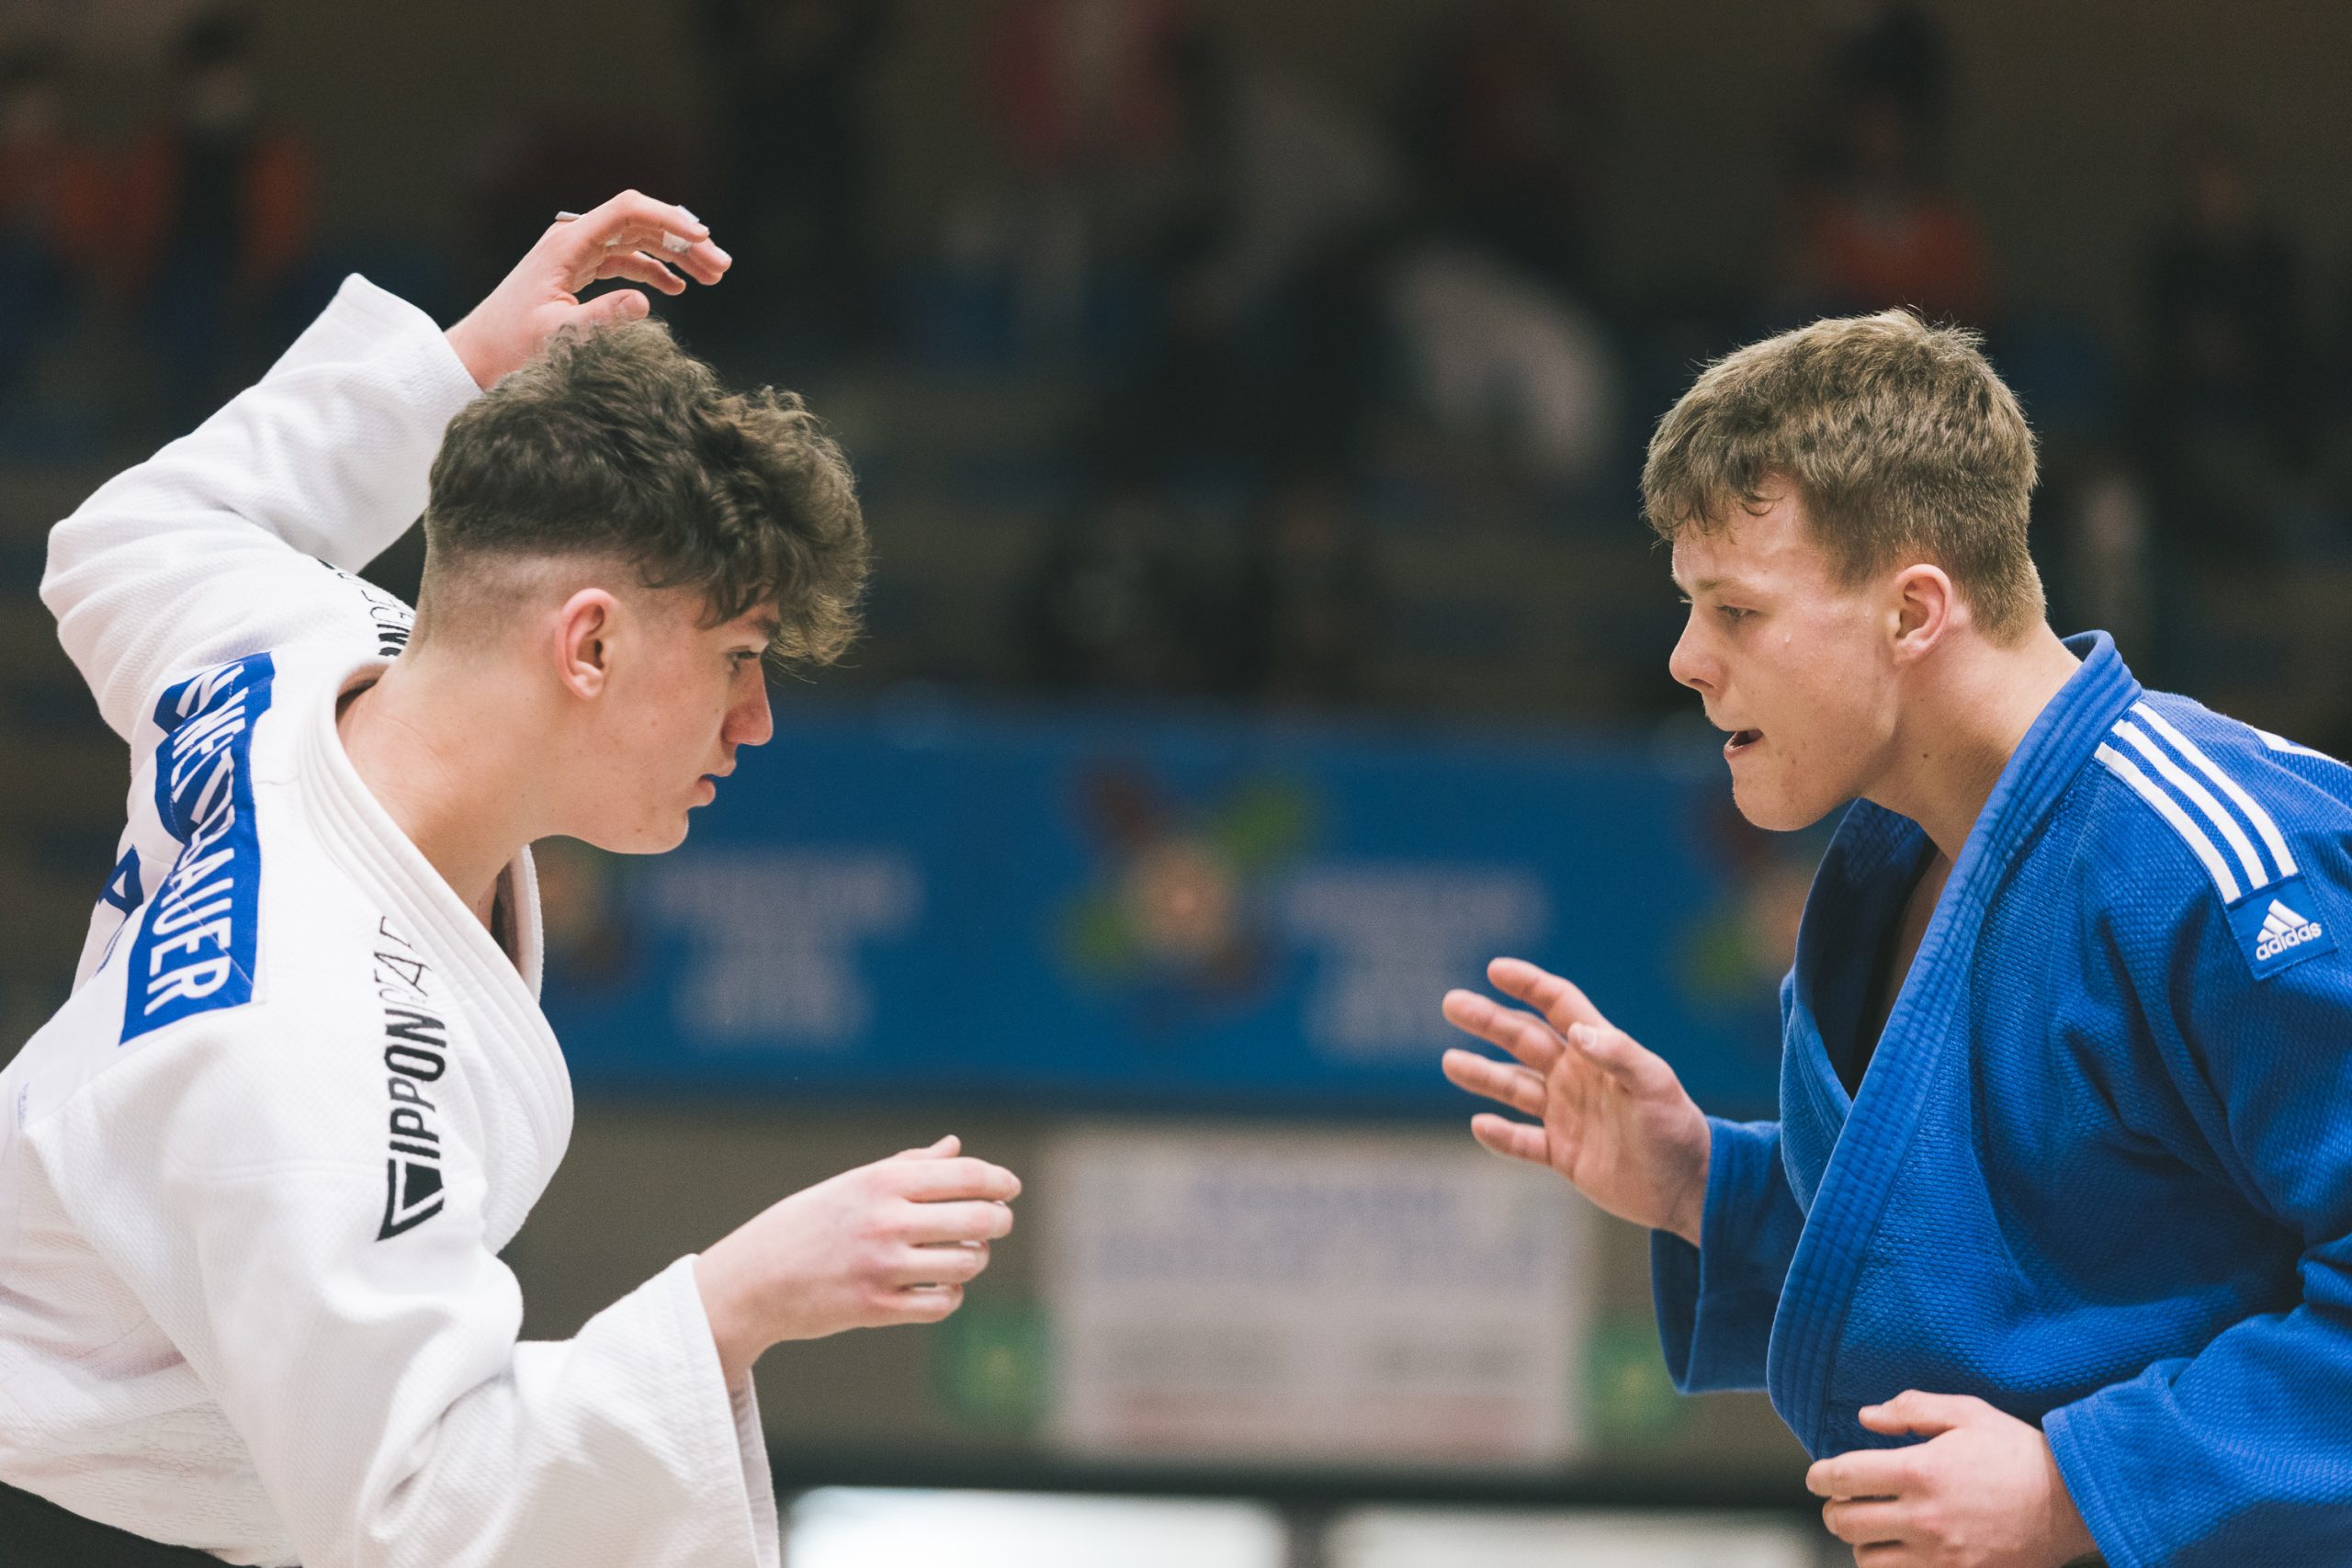 TERRIFIC NUMBERS FLY IN TO TEPLICE FOR CADET EUROPEAN CUP